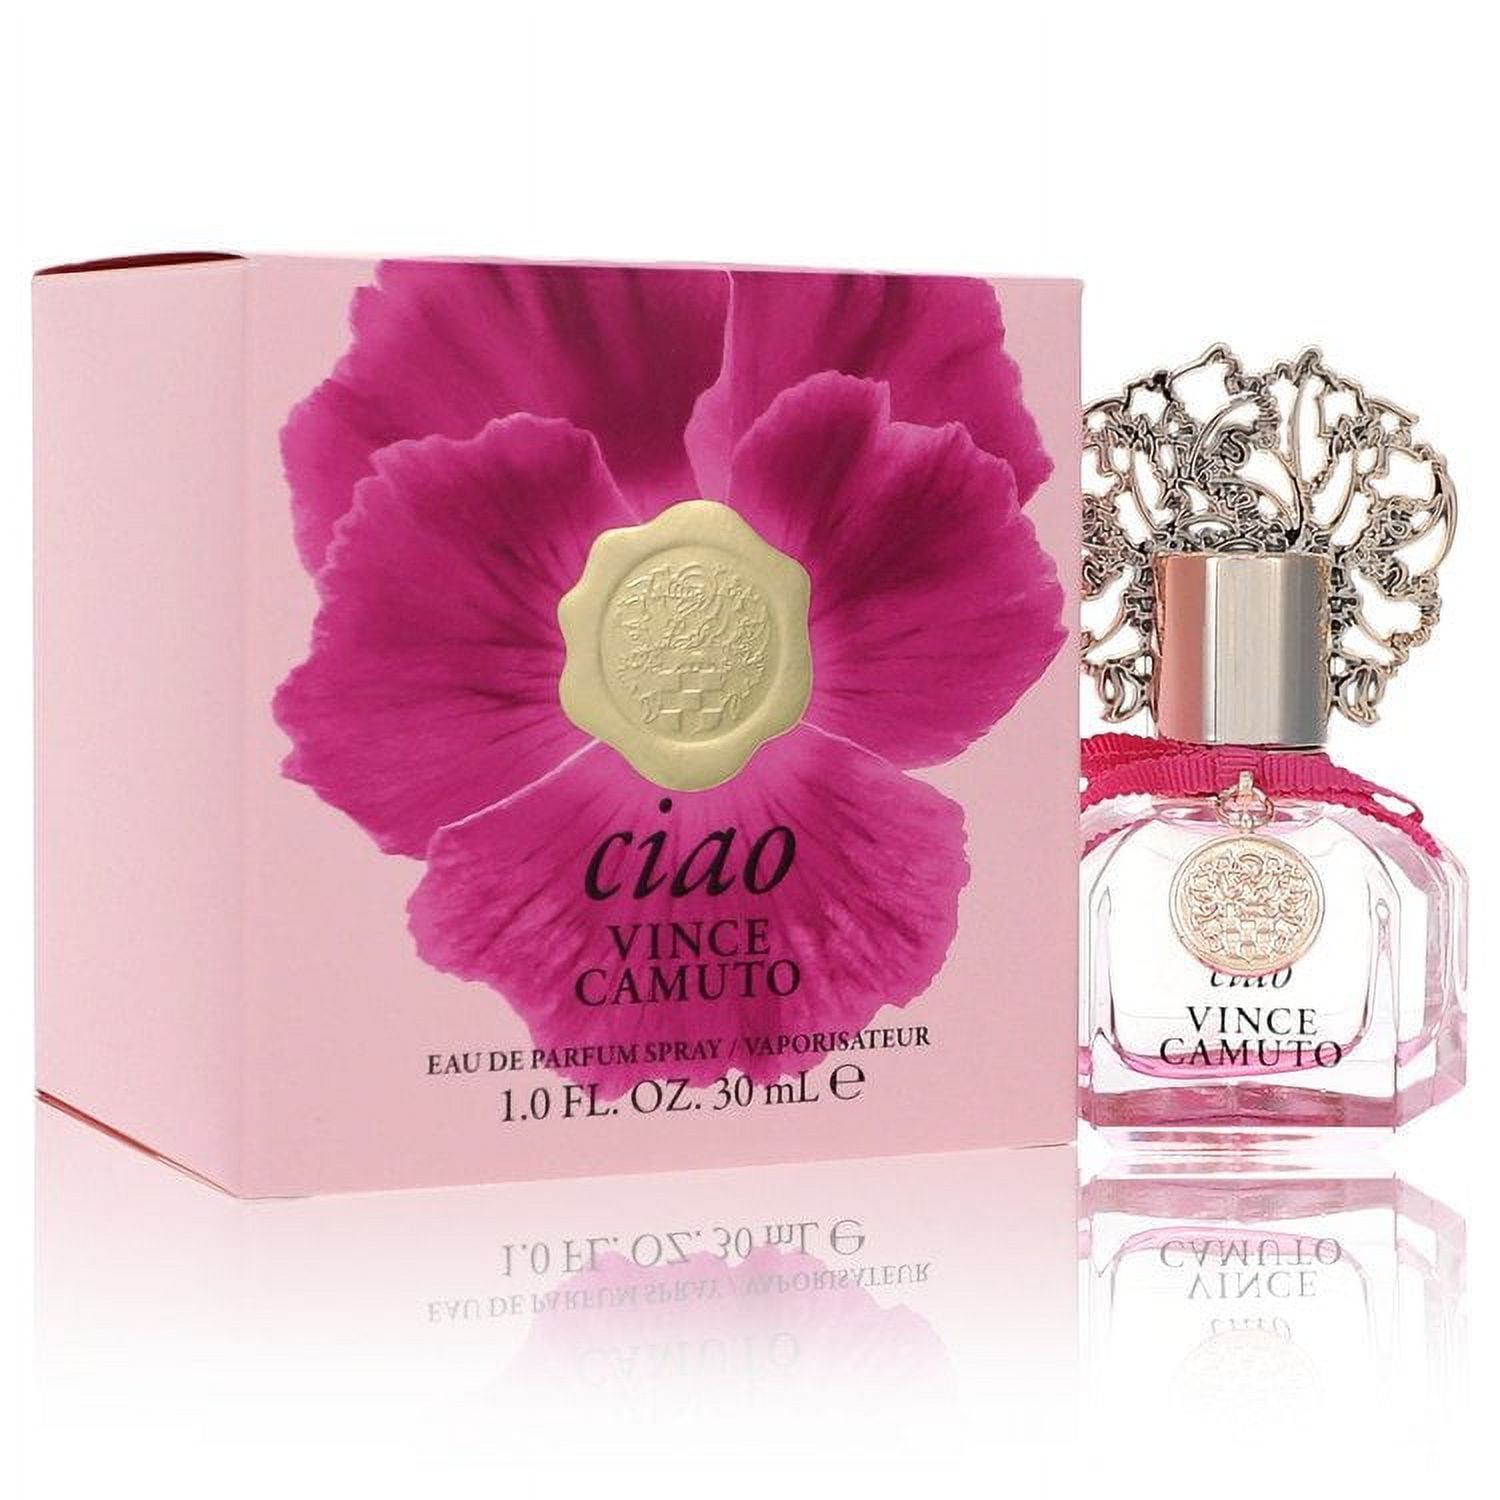 Vince Camuto Ciao Perfume by Vince Camuto